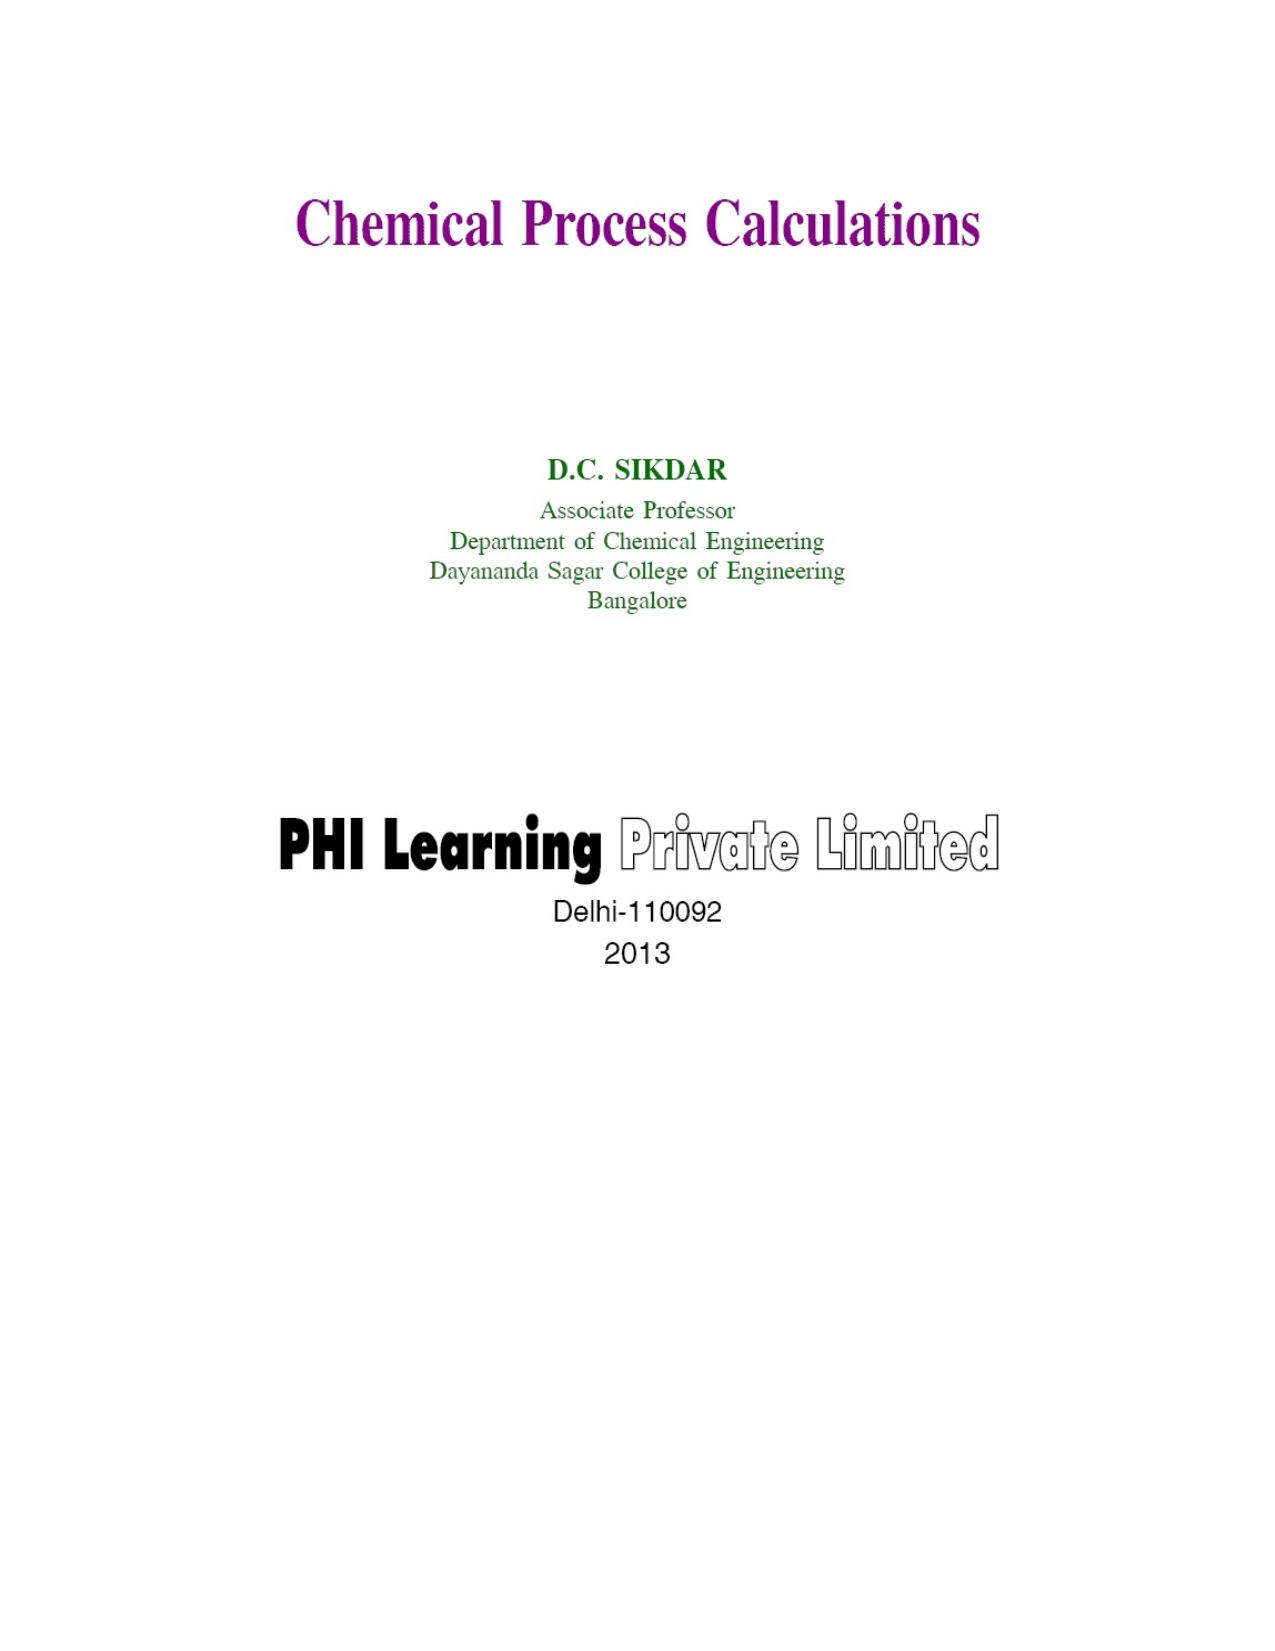 CHEMICAL PROCESS CALCULATIONS